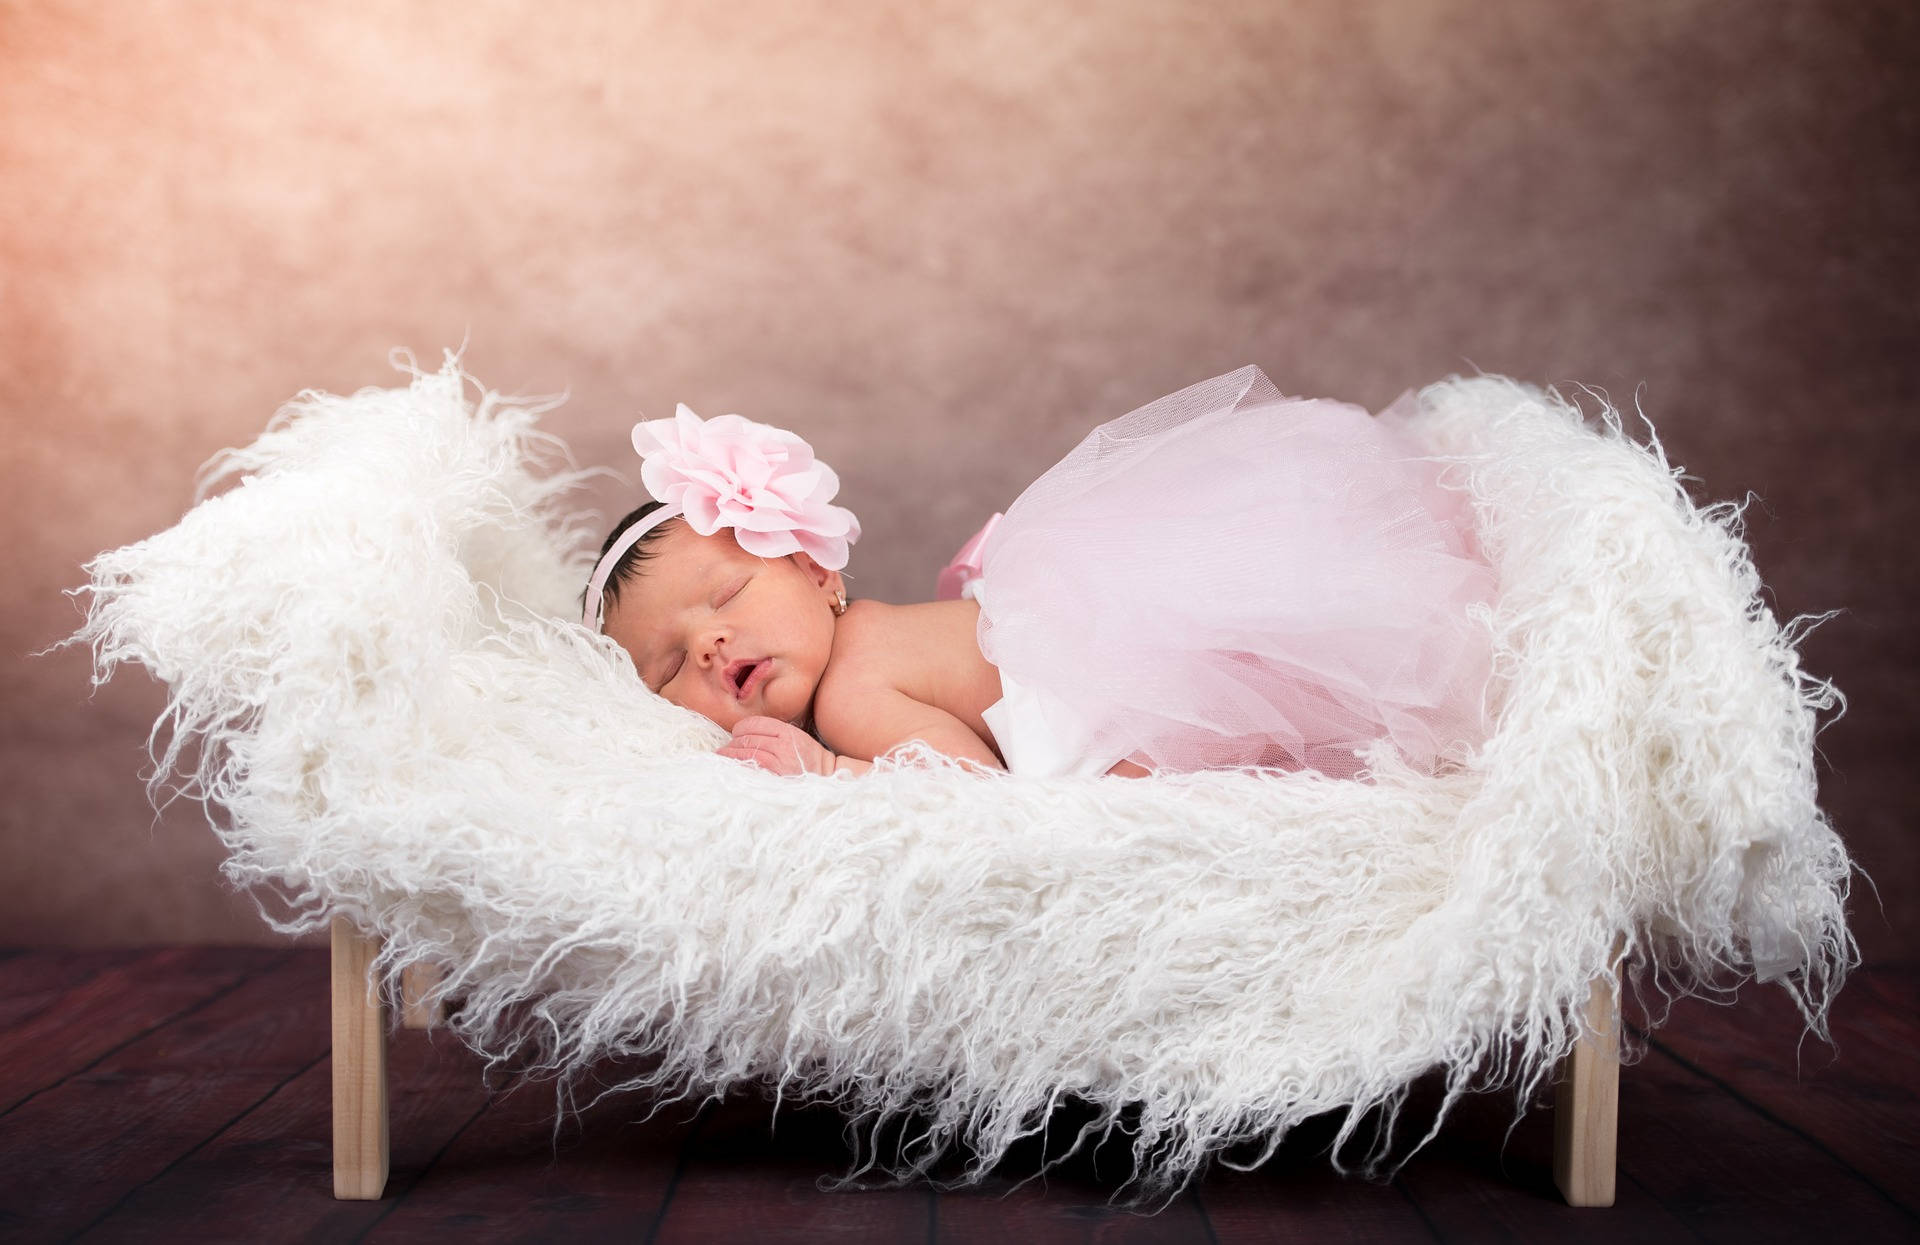 Very Cute Baby On Fluffy Bed Background